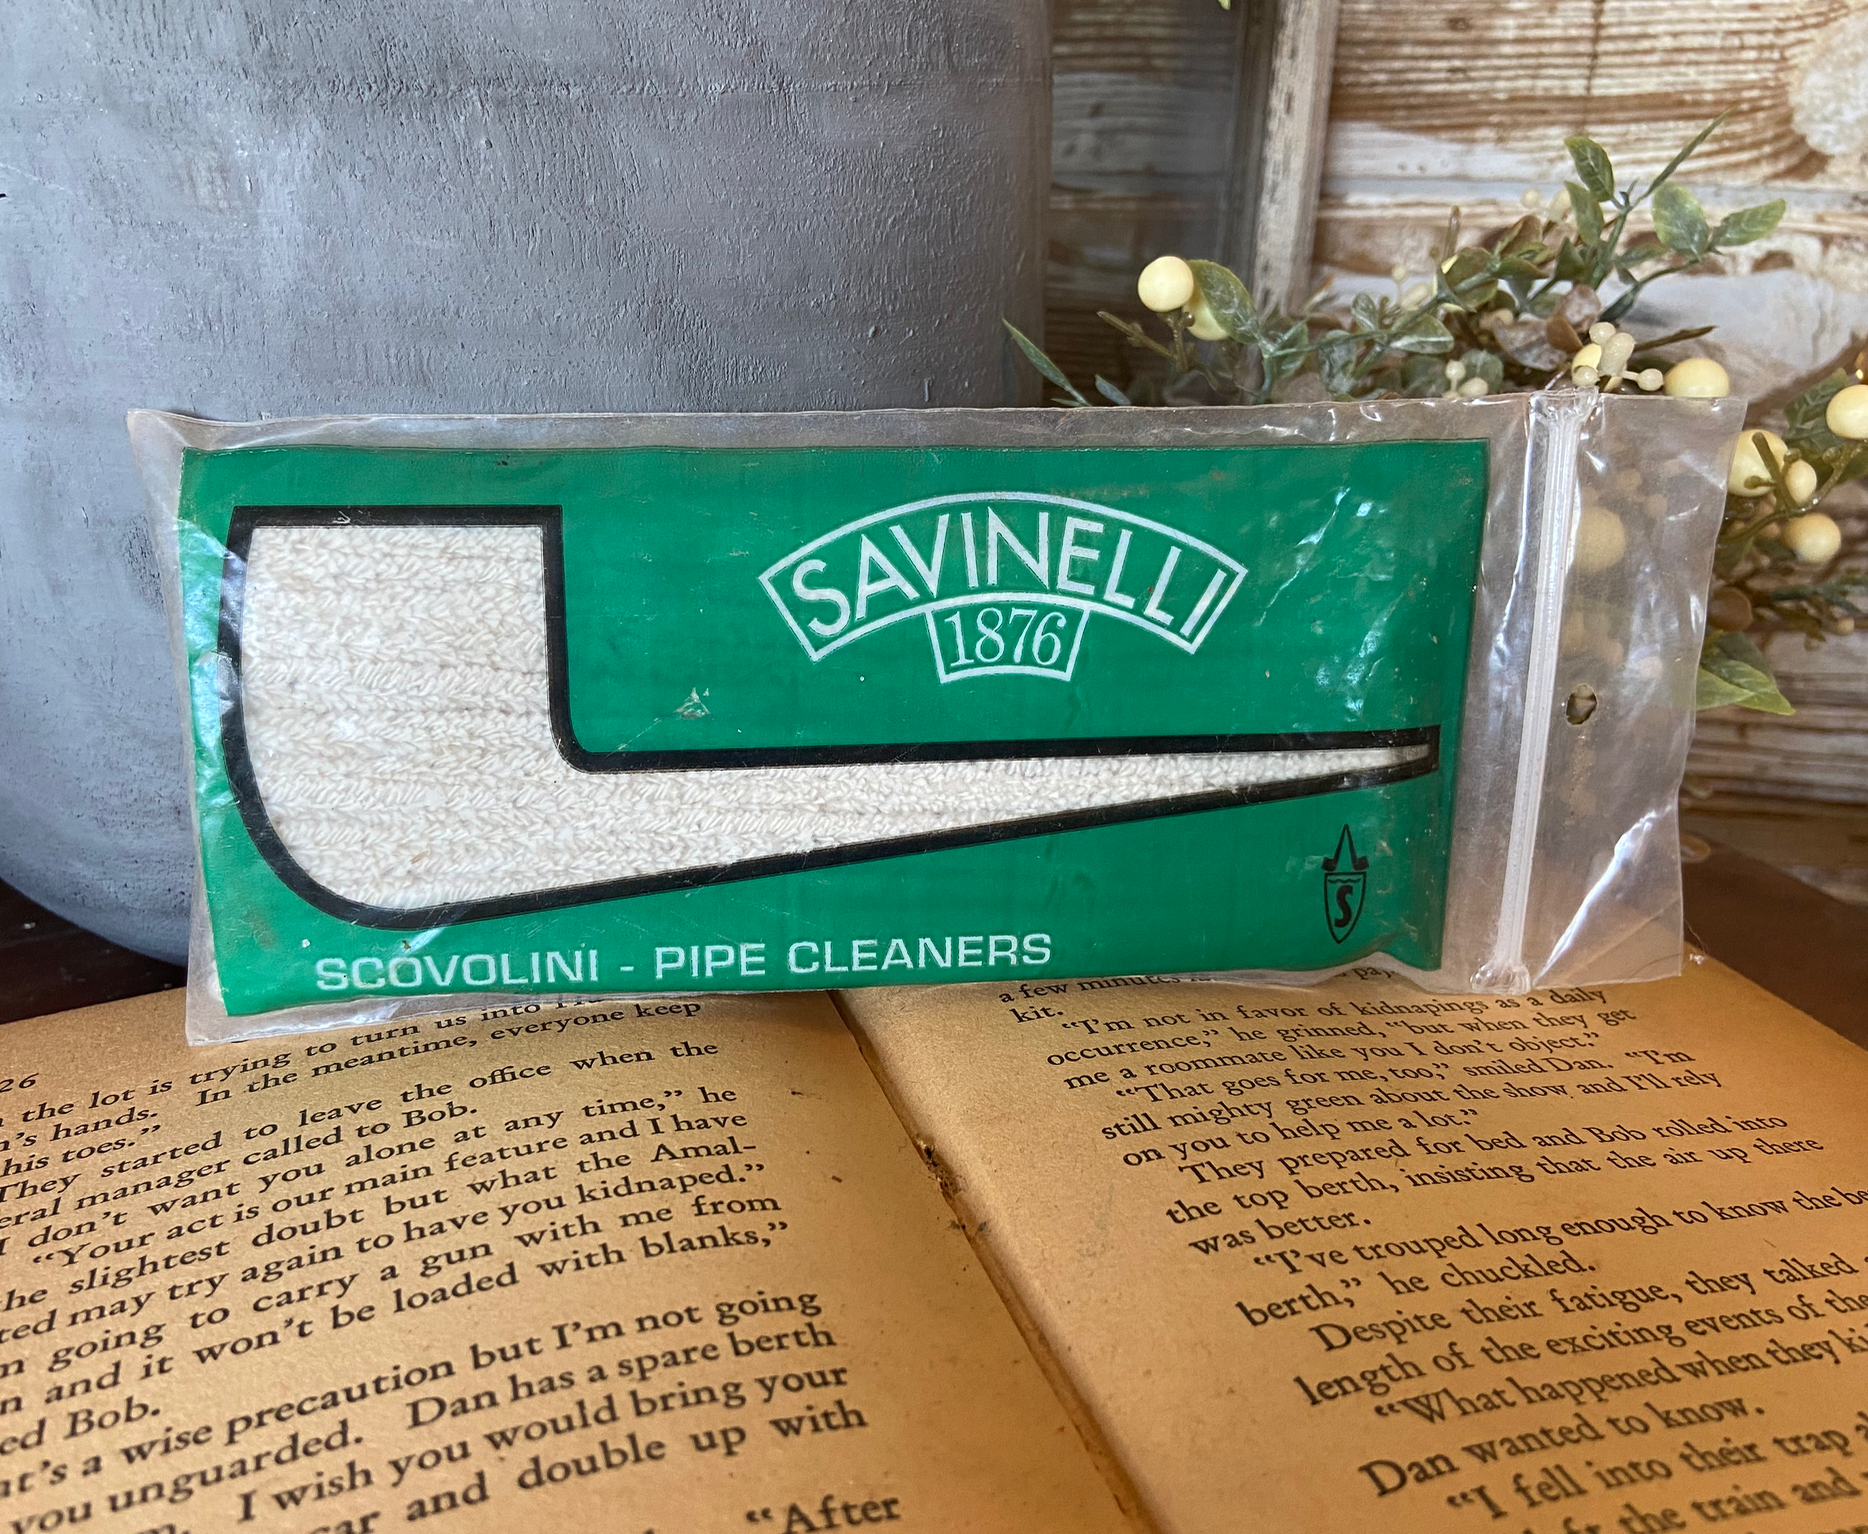 Vintage Italian Scovolini Pipe Cleaners – The Gentleman's Stache, DBA  Mercantile 1858